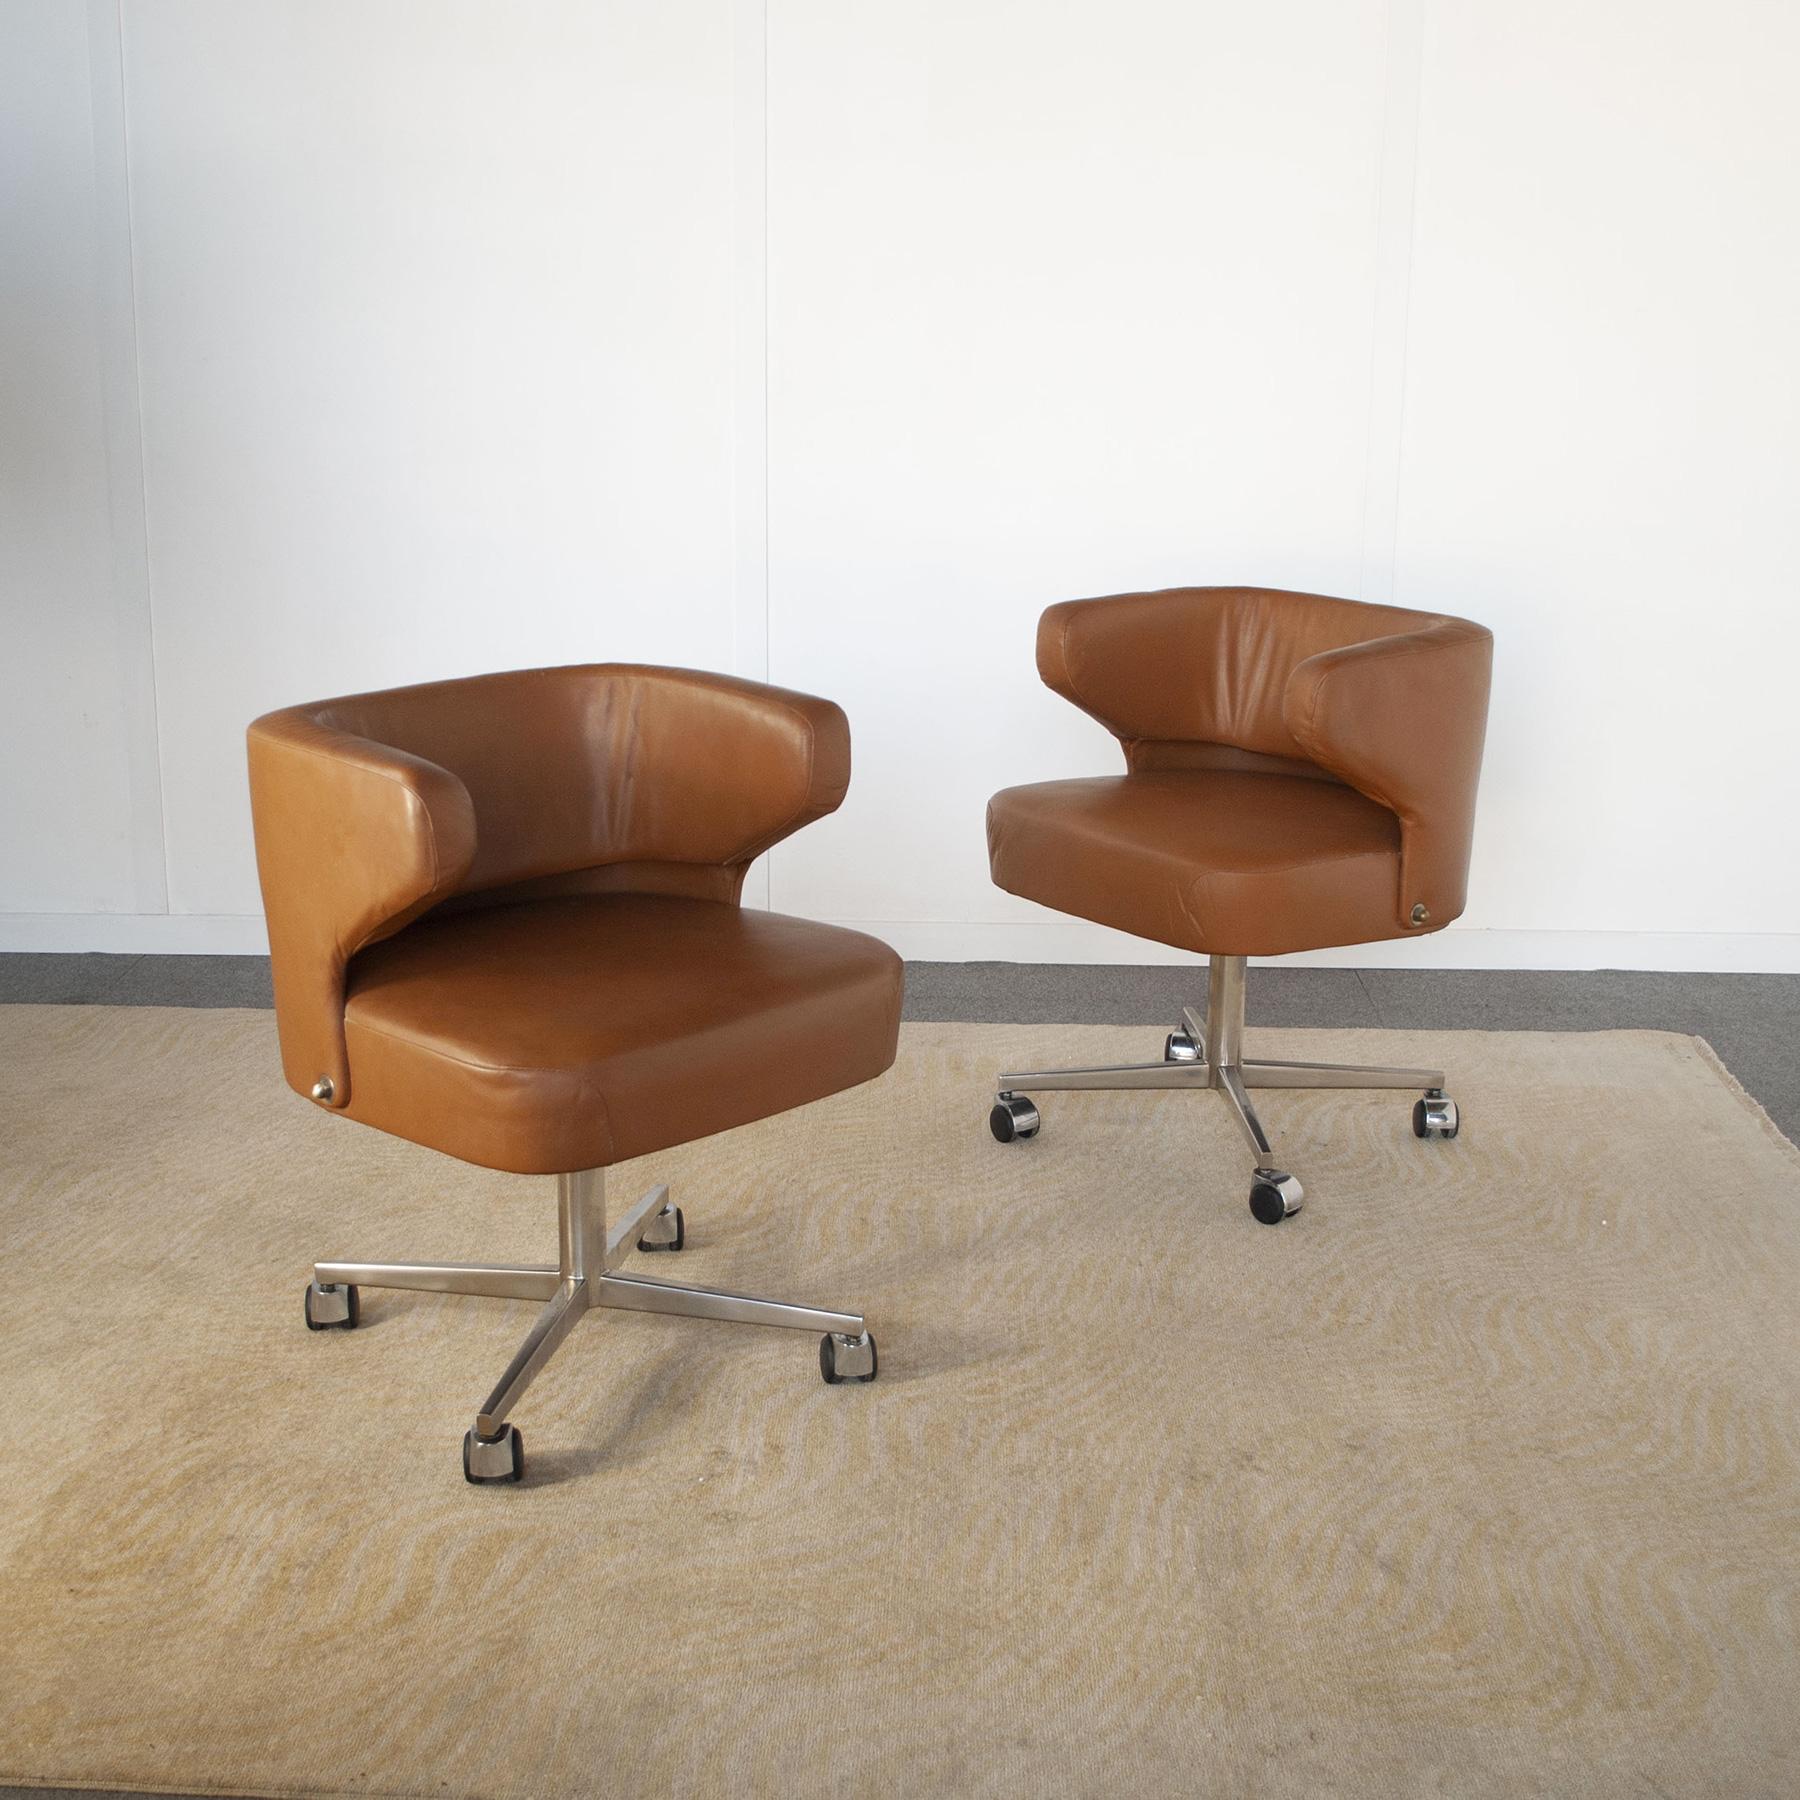 Pair of small armchairs Poney model steel frame and leather seat 1960s production Formanova designer Gianni Moscatelli.